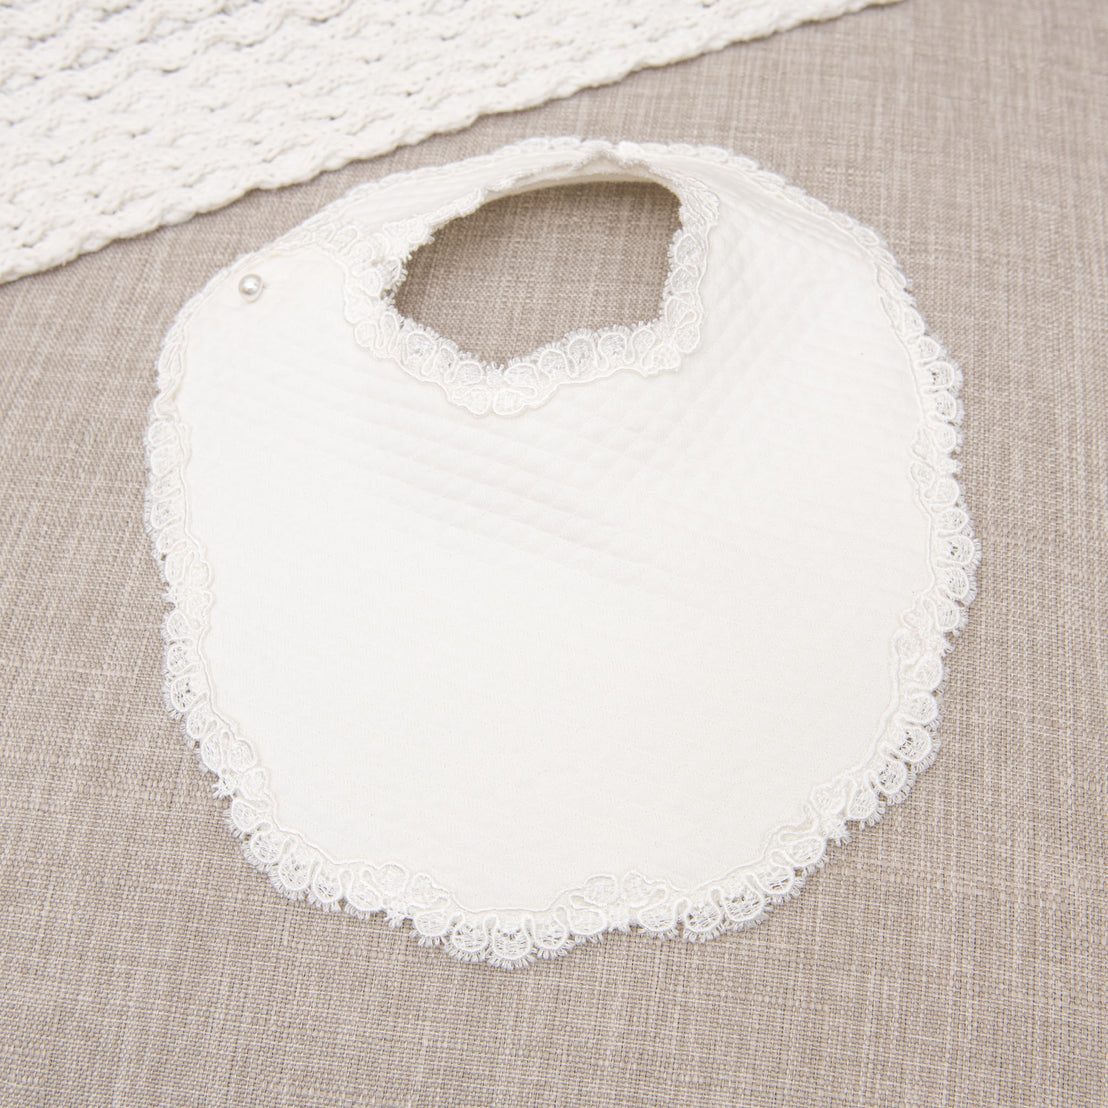 A white Madeline Bib with a scalloped lace trim and a single button closure, resting on a textured gray fabric surface.